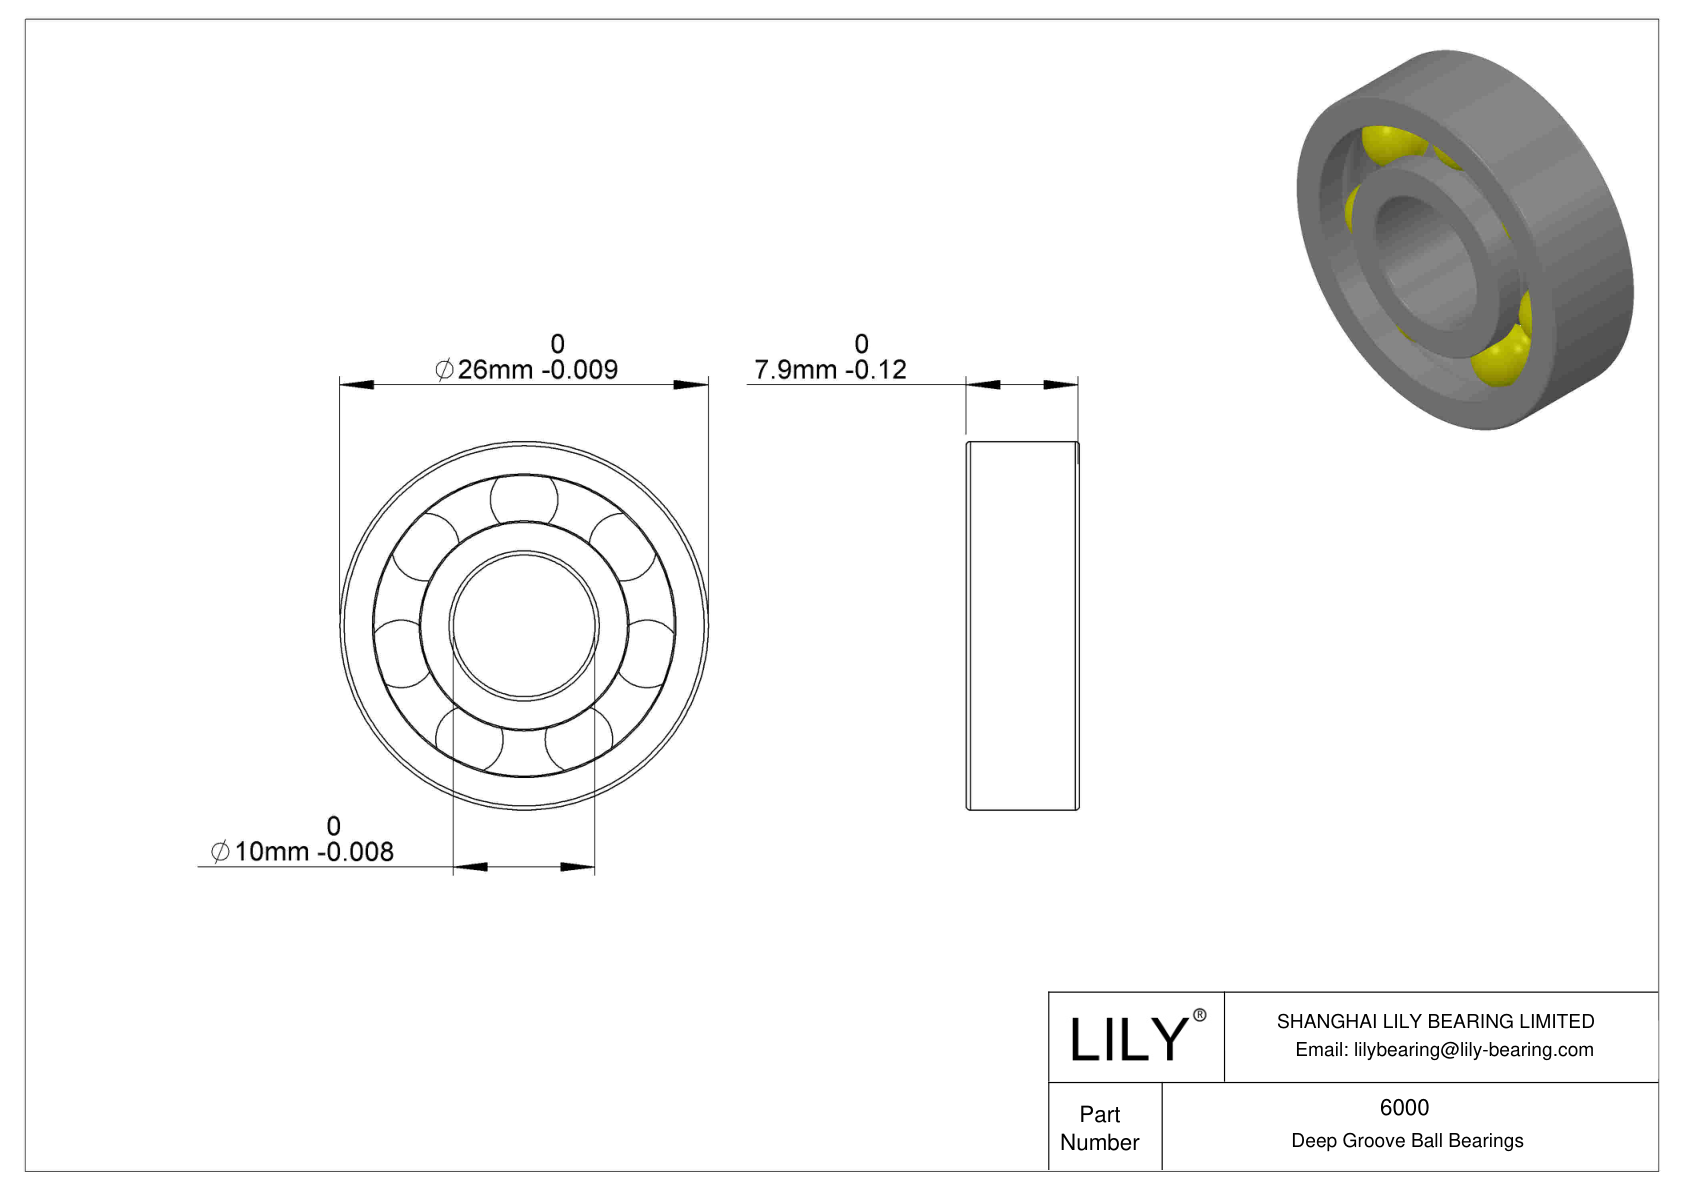 LILY-PU600040-10C1L10M8 Polyurethane Coated Bearing With Screw cad drawing